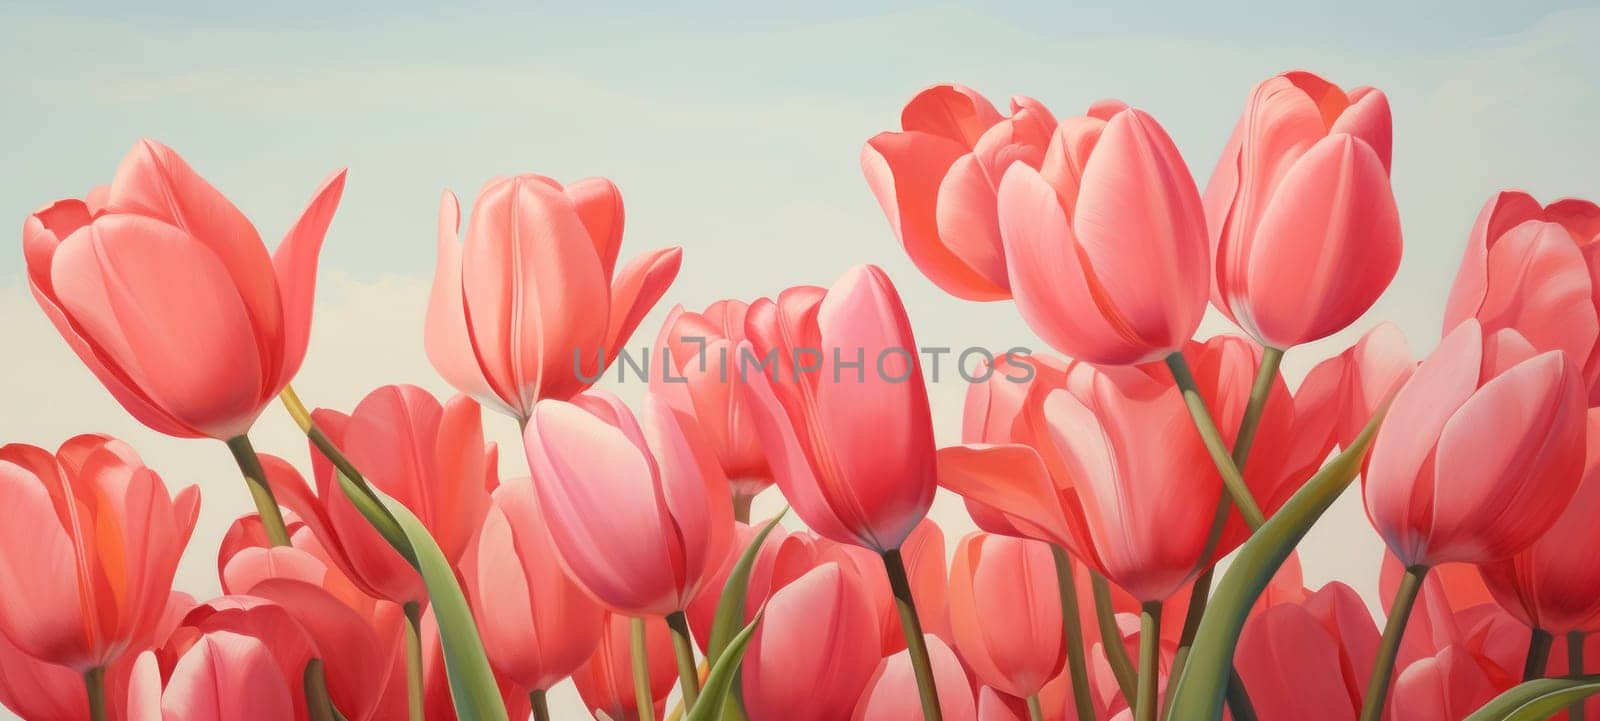 A beautiful close-up of pink tulips with a soft focus background, highlighting the spring season.